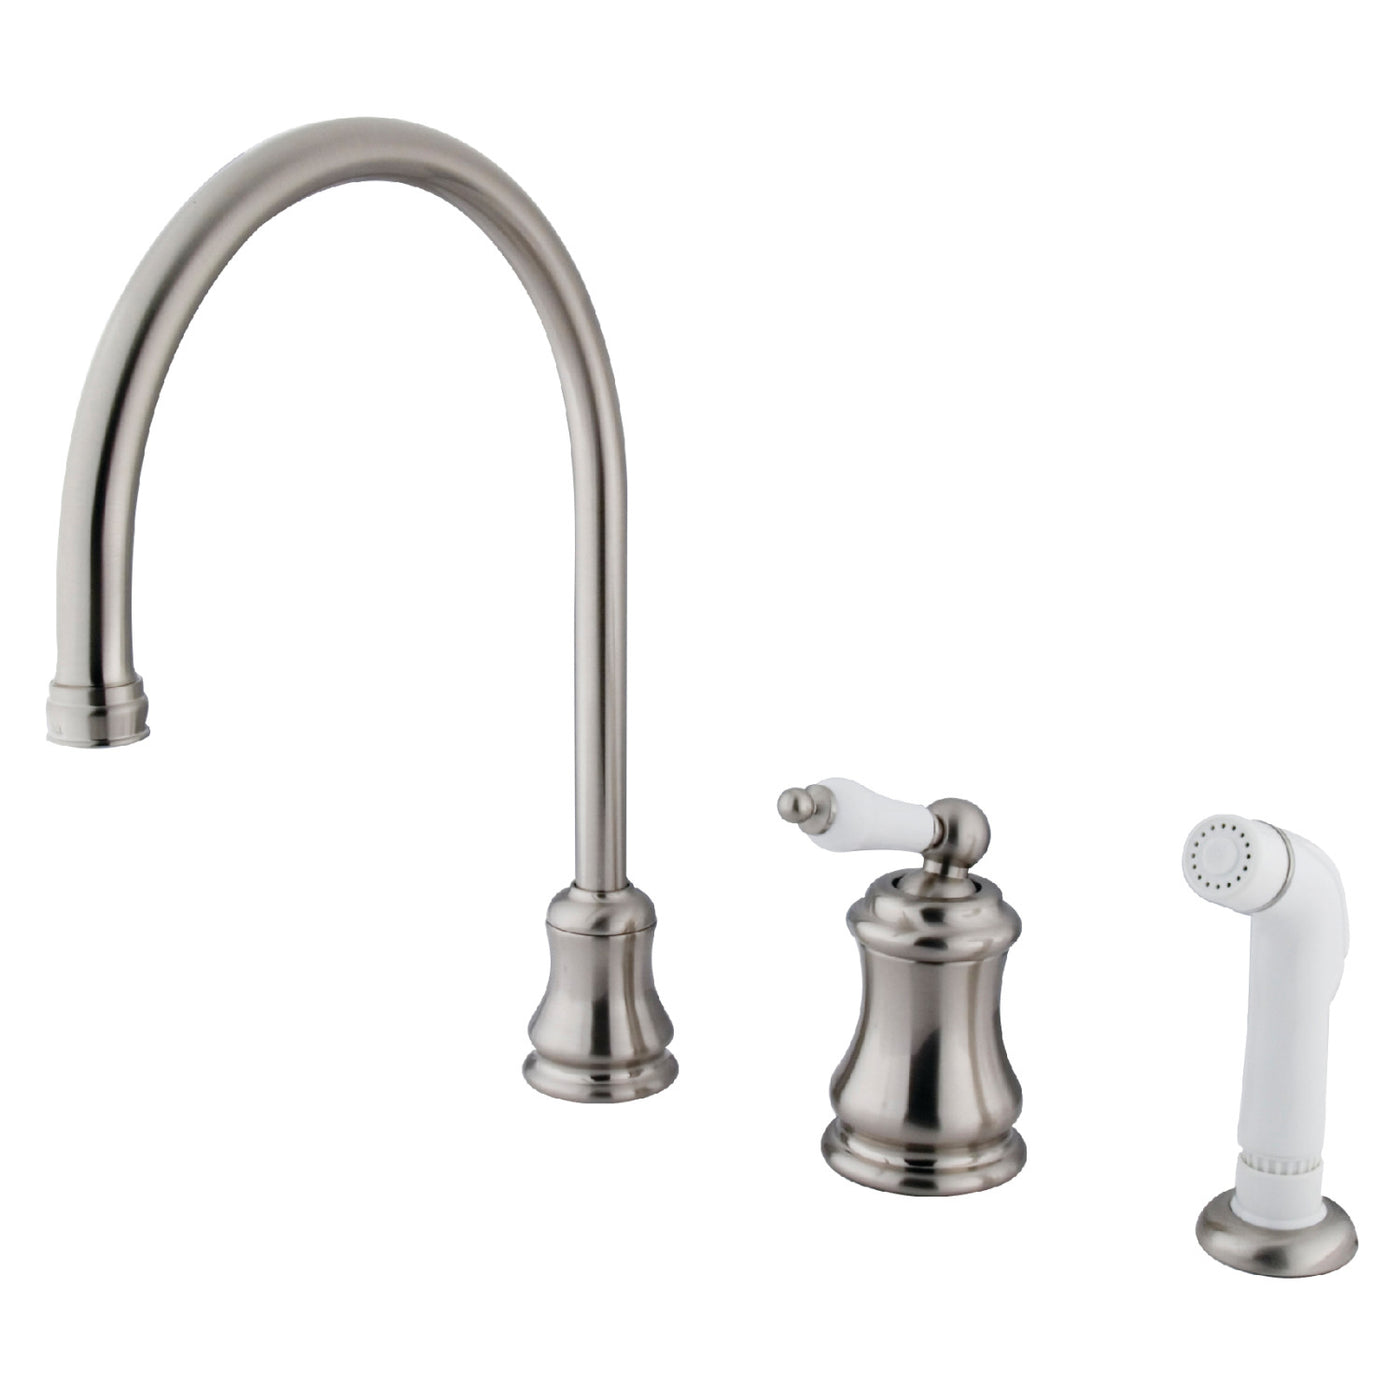 Elements of Design ES3818PL Single-Handle Widespread Kitchen Faucet with Plastic Sprayer, Brushed Nickel